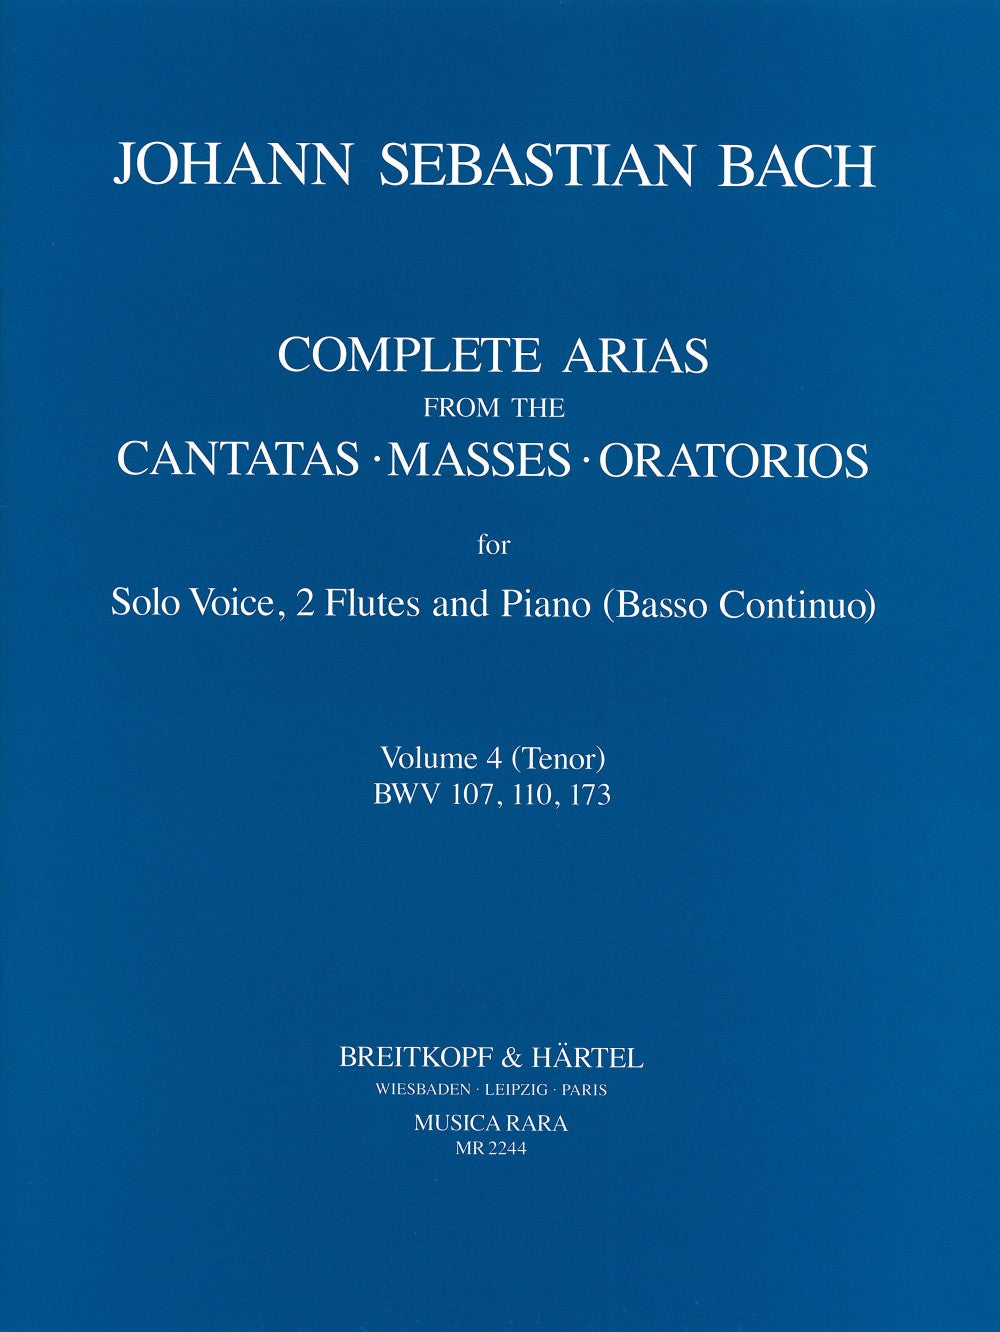 Bach Complete Arias from the Cantatas, Masses, Oratorios Volume 4